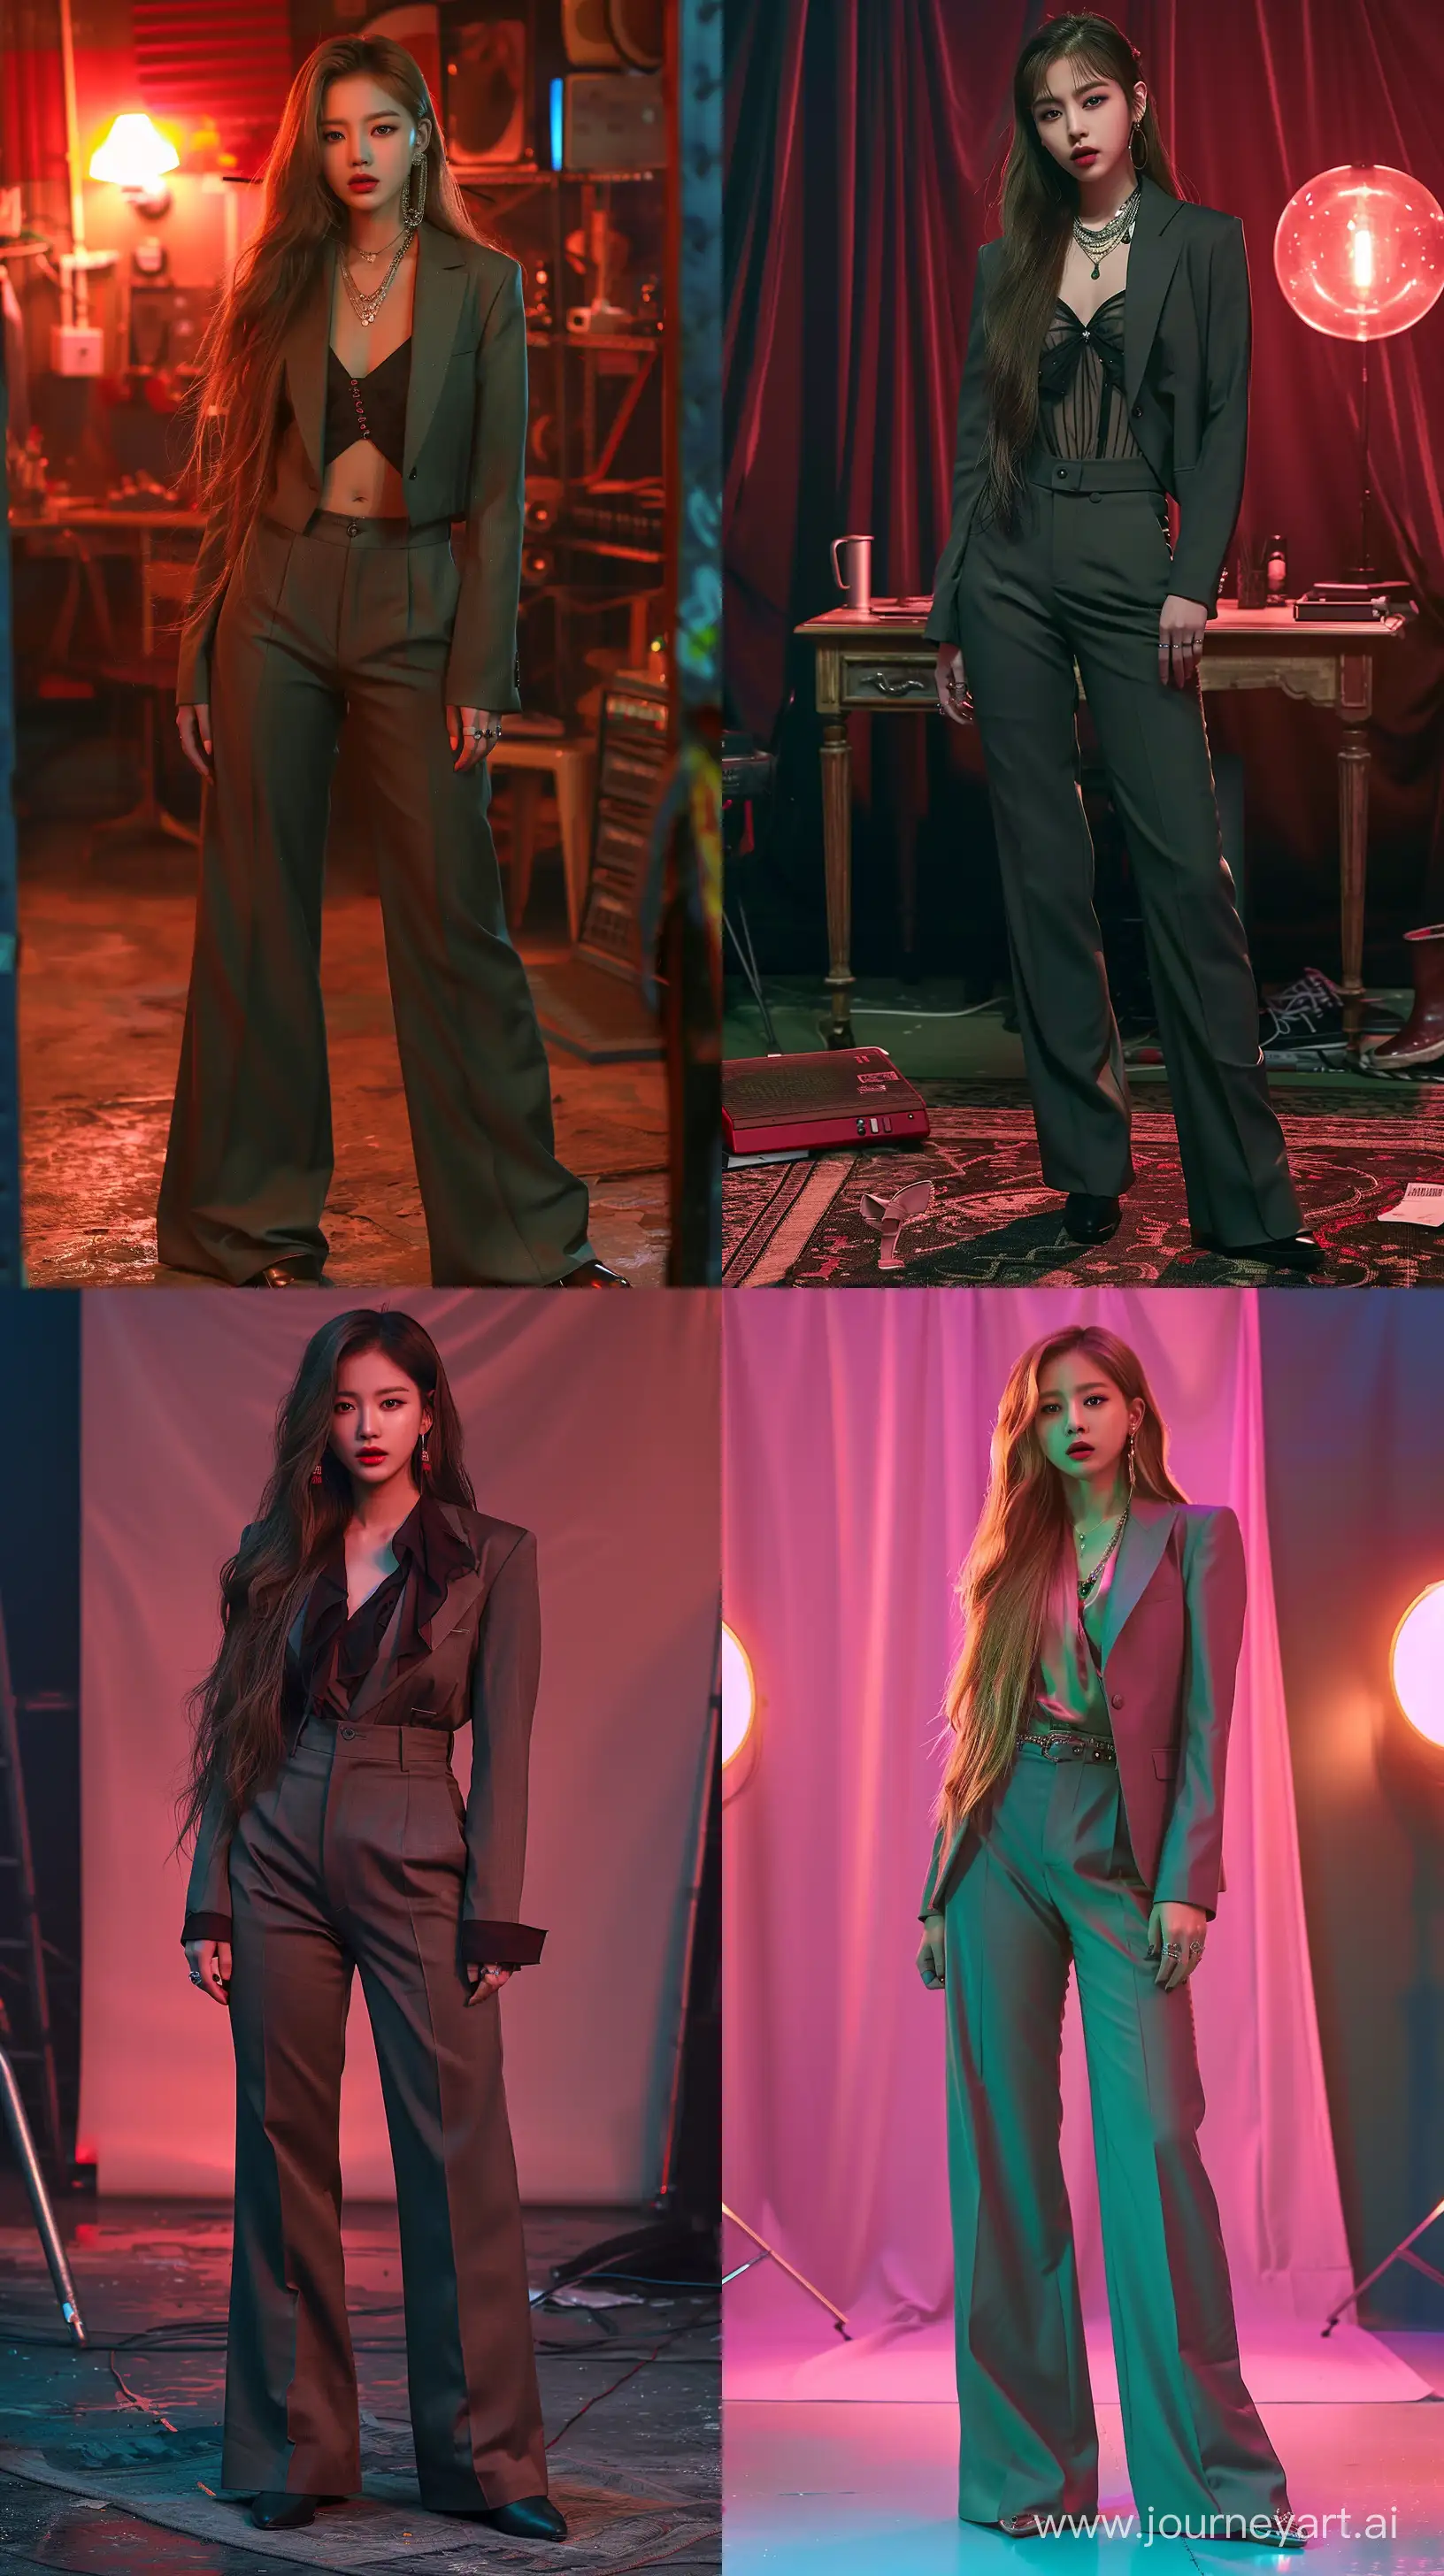 High resolution fashion photo of jennie blackpink's full body shot, wearing a suit pants and simple blouse on a creepy studio set, super casual, everyday attire, in the style of jennie, mysterious nocturnal scenes, mischievous motif, album covers, flickr --ar 9:16 --style raw --stylize 250 --v 6